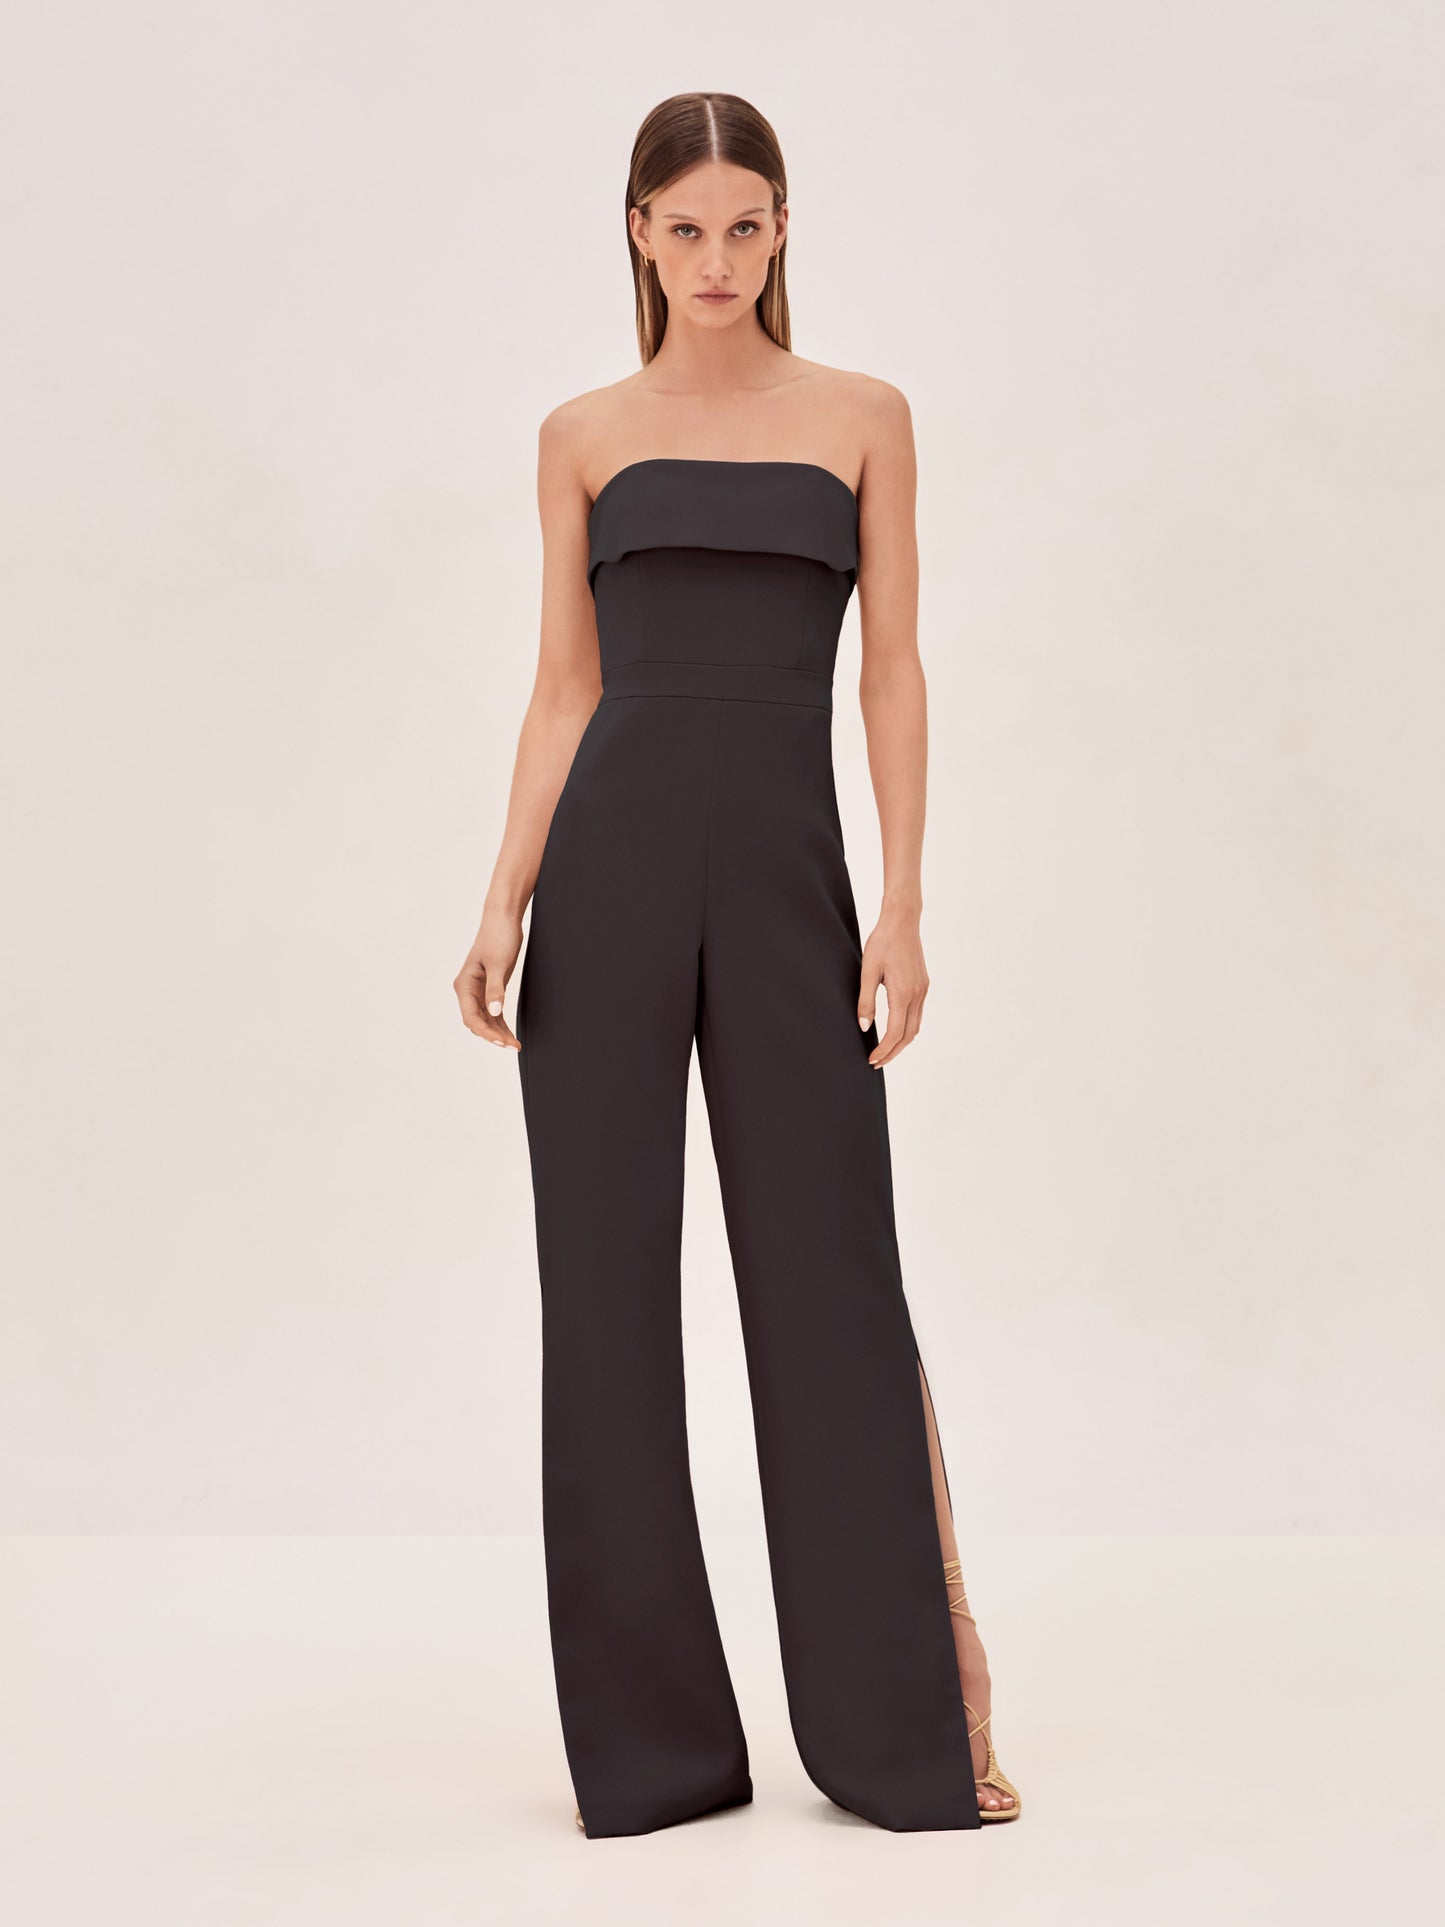 ALEXIS Strapless kaye jumpsuit in black with slit on pant leg